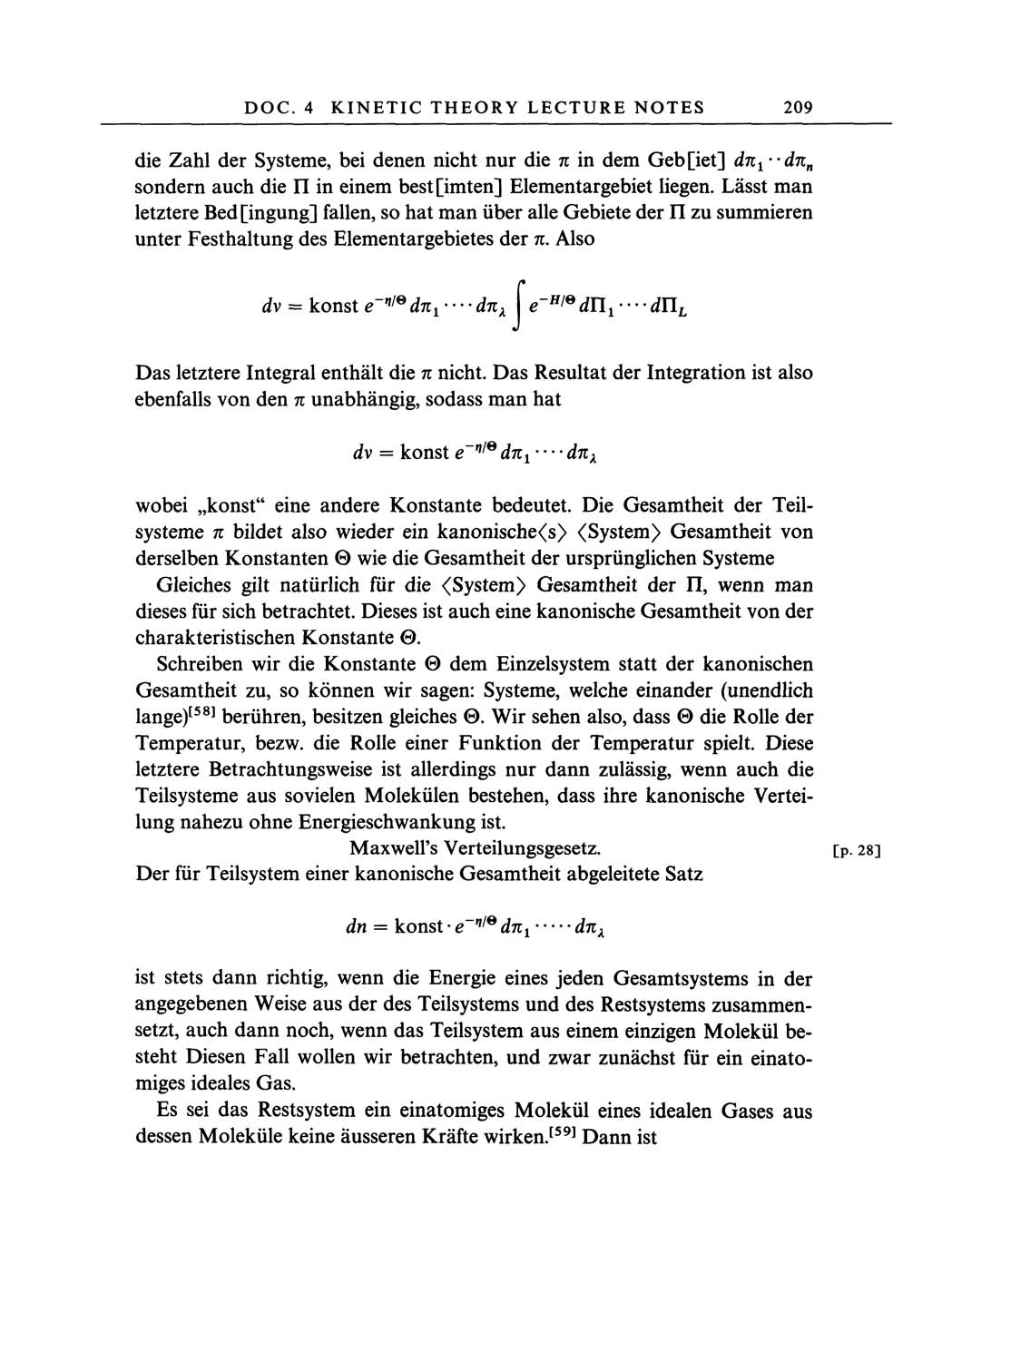 Volume 3: The Swiss Years: Writings 1909-1911 page 209